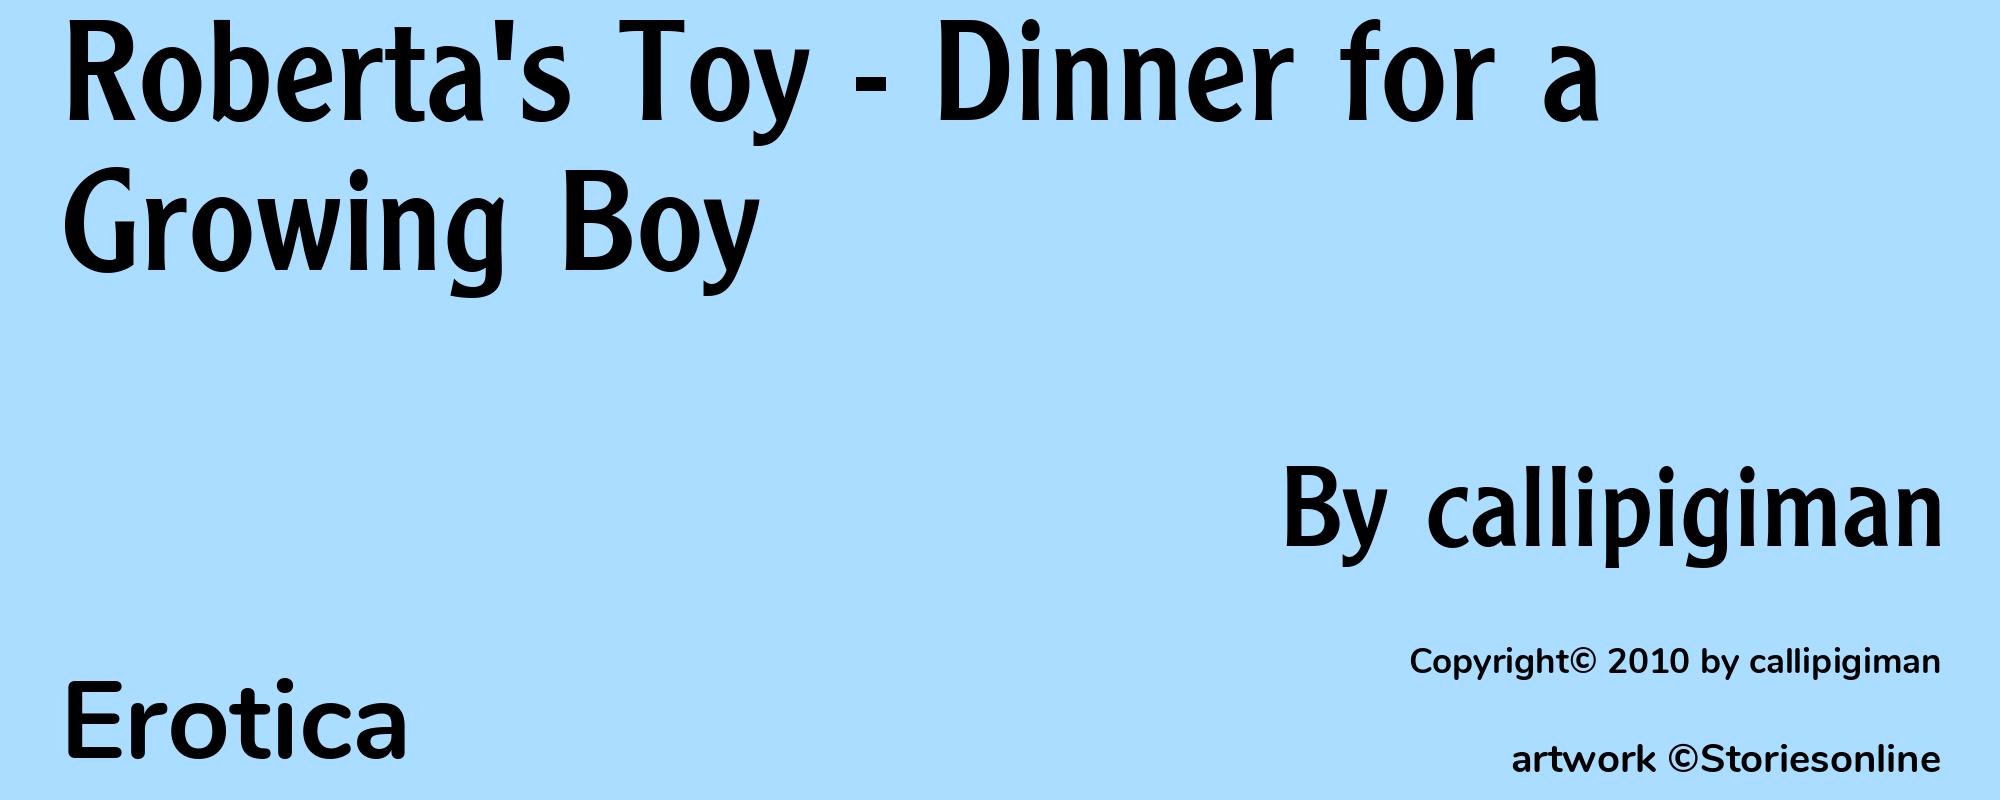 Roberta's Toy - Dinner for a Growing Boy - Cover